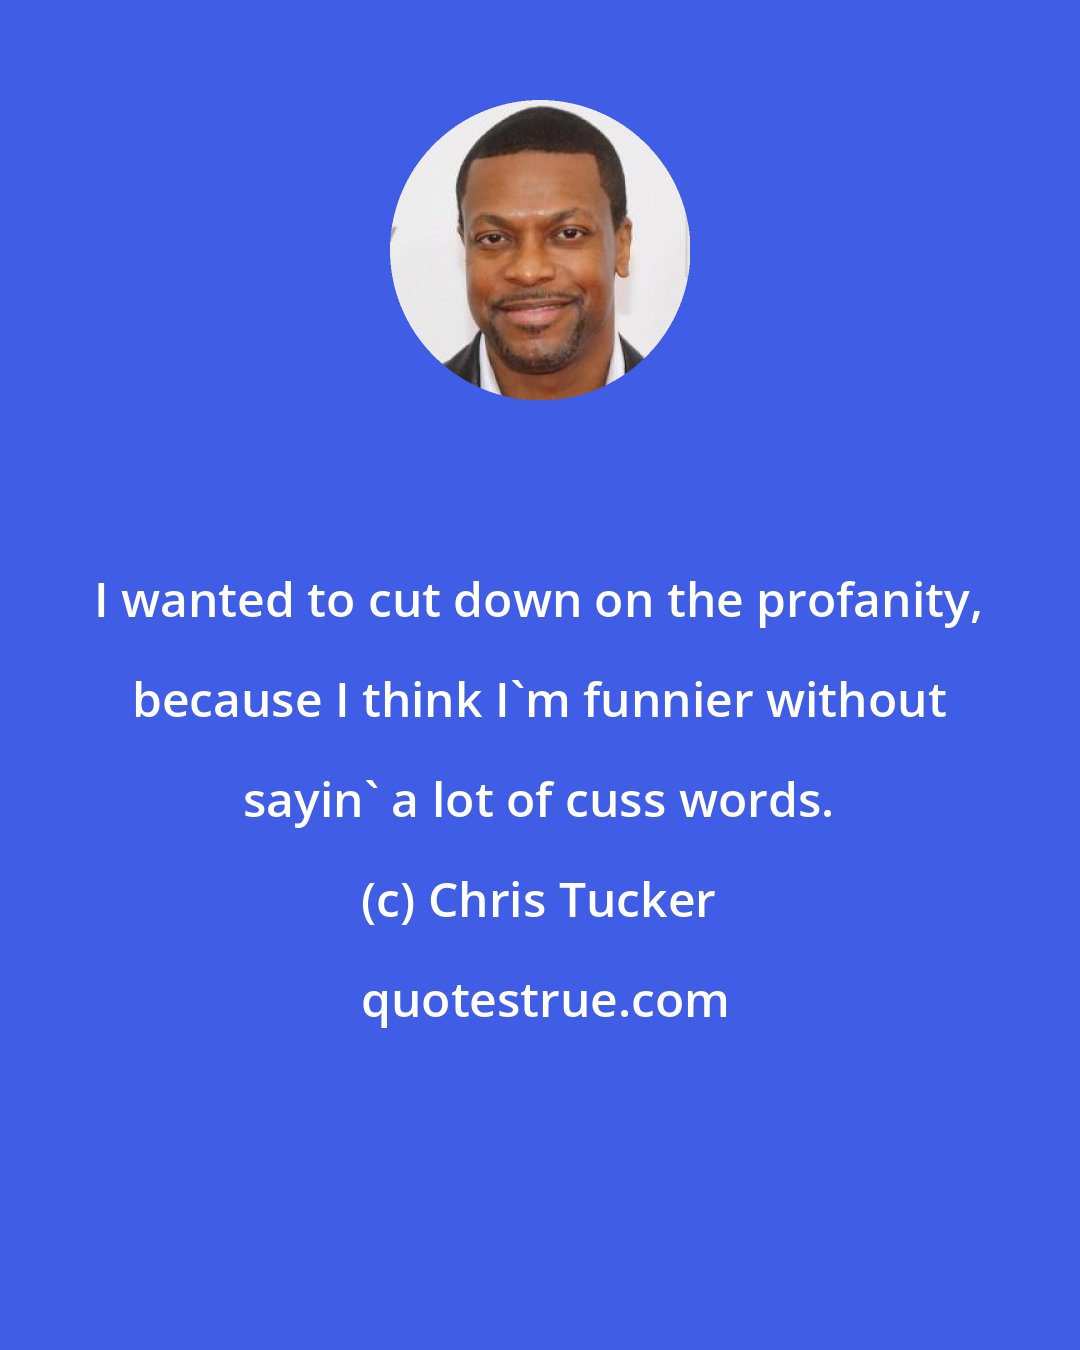 Chris Tucker: I wanted to cut down on the profanity, because I think I'm funnier without sayin' a lot of cuss words.